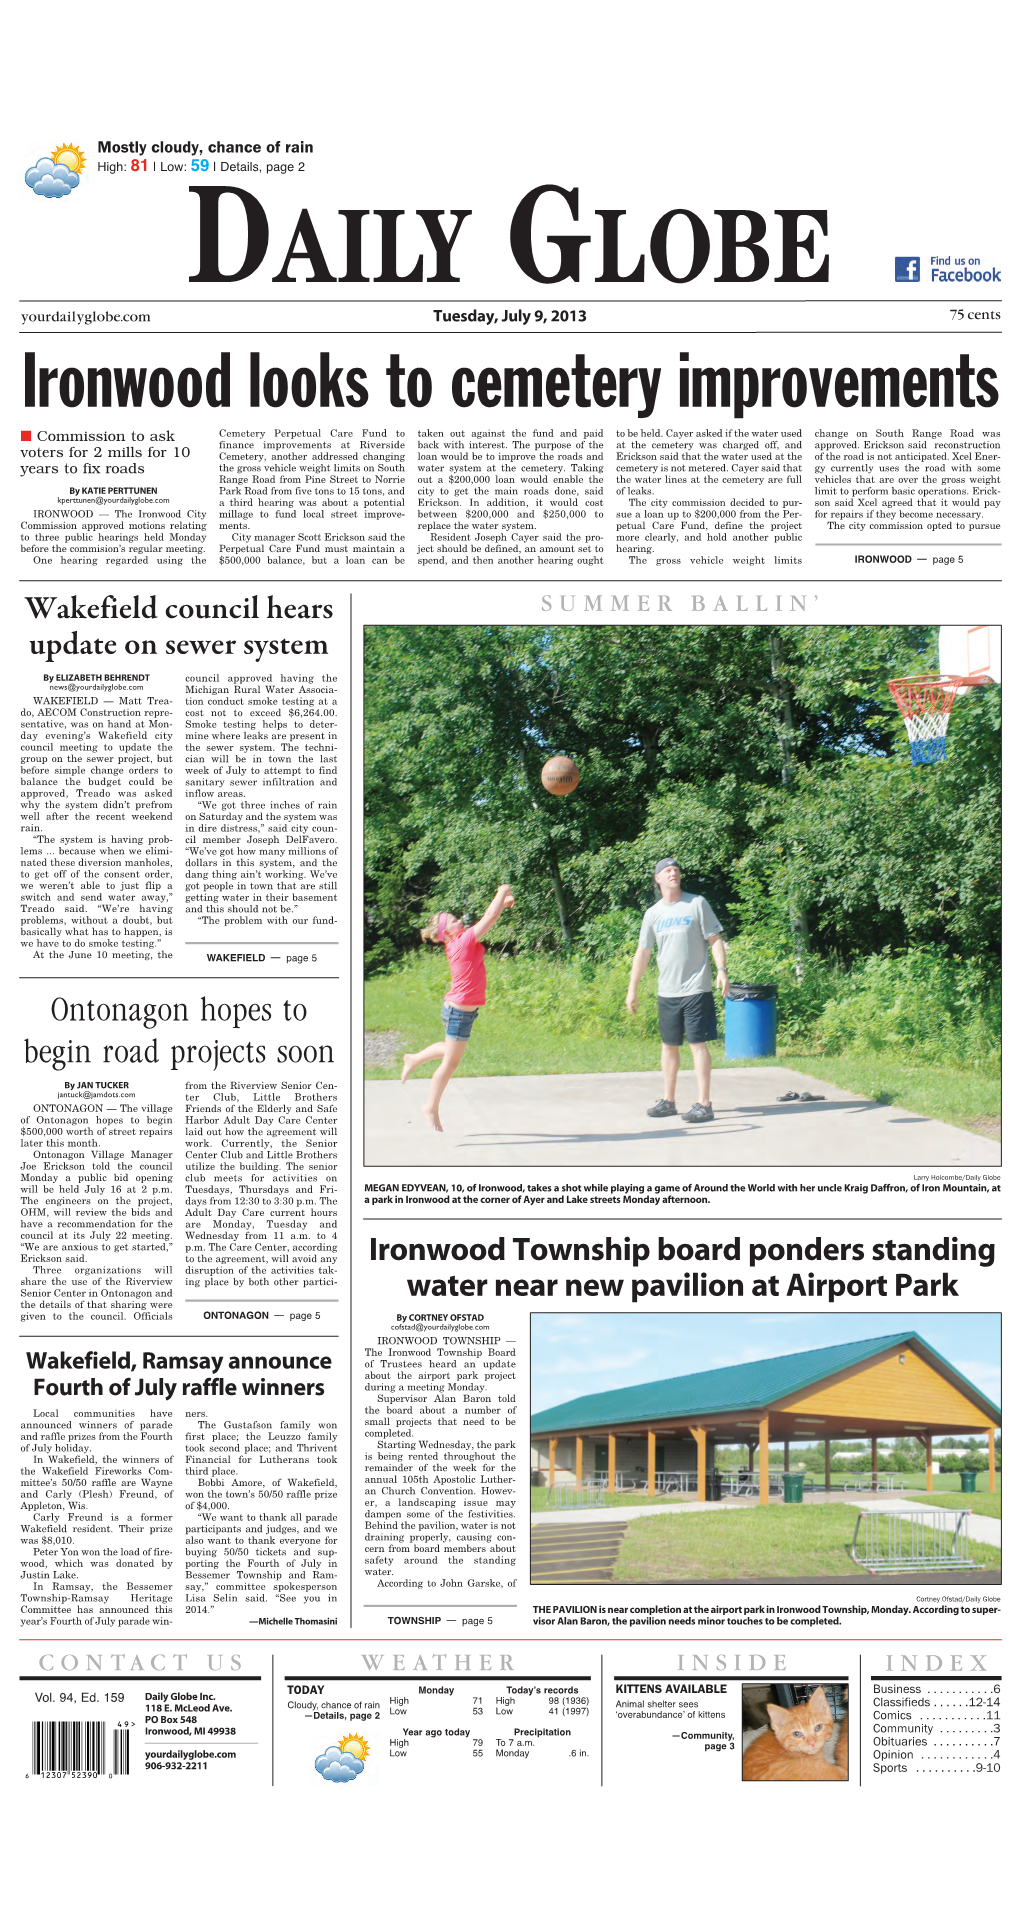 Ironwood Township Board Ponders Standing Water Near New Pavilion At